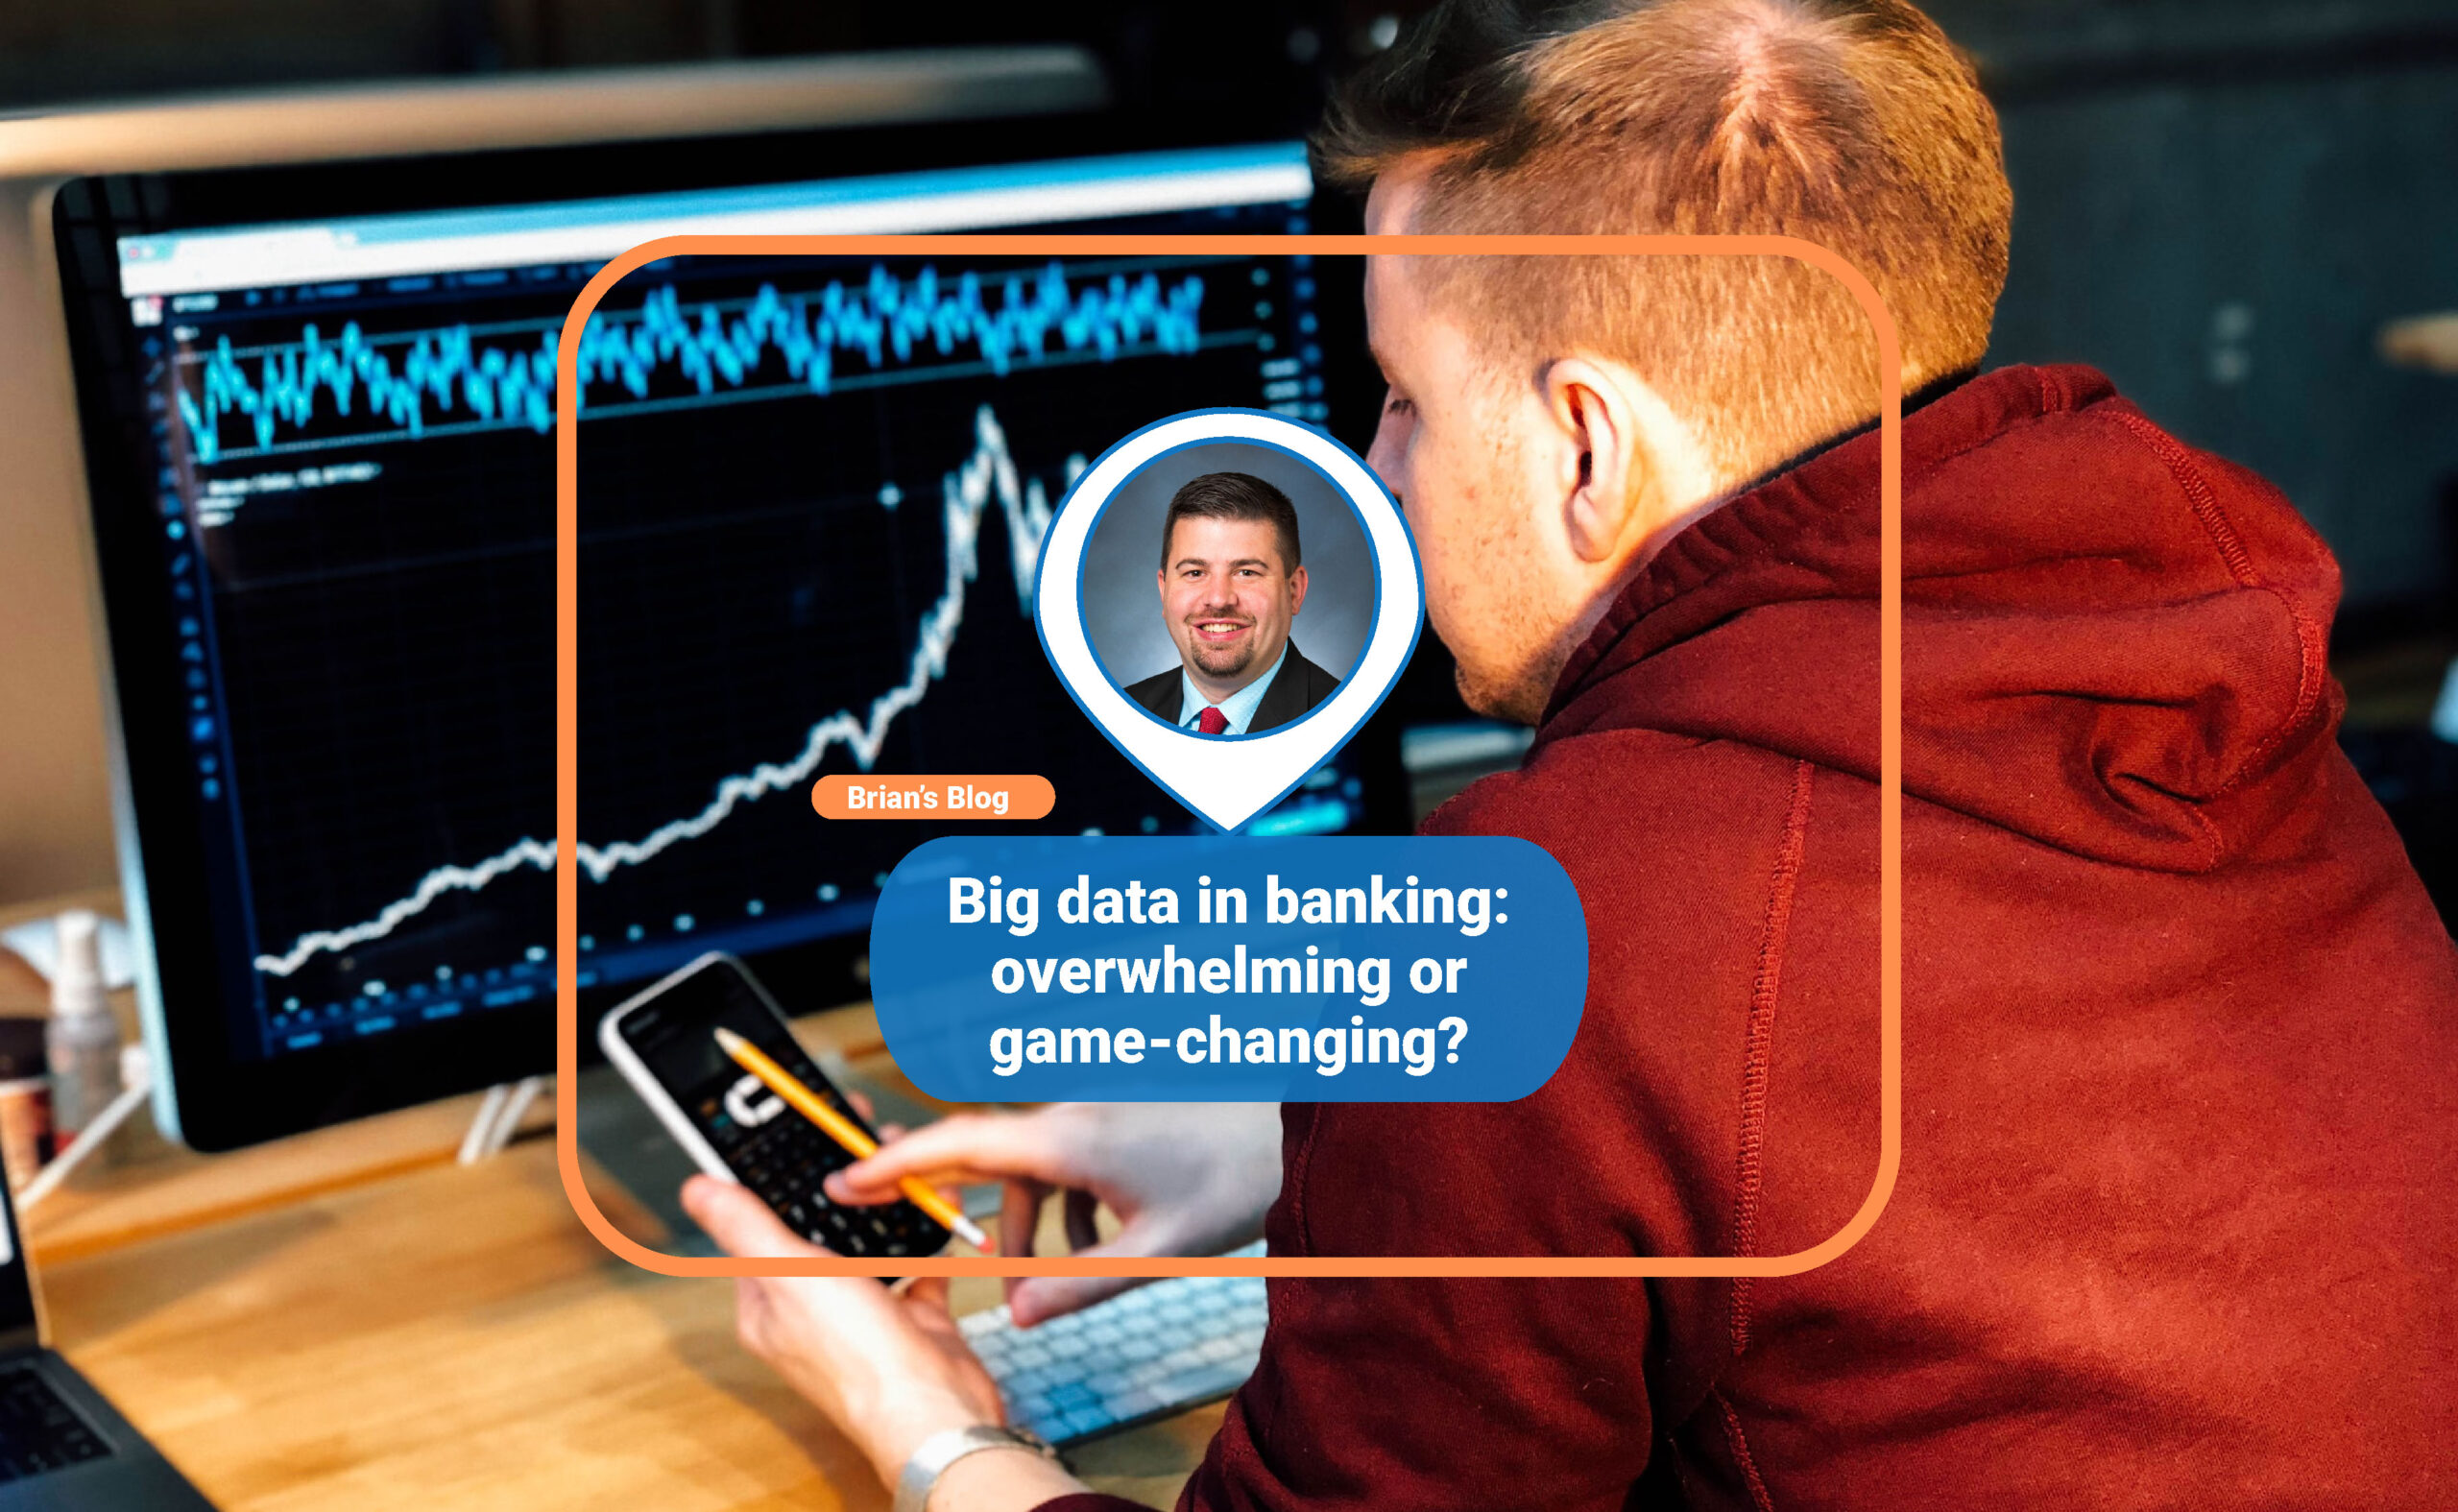 Big data in banking – overwhelming or game-changing?